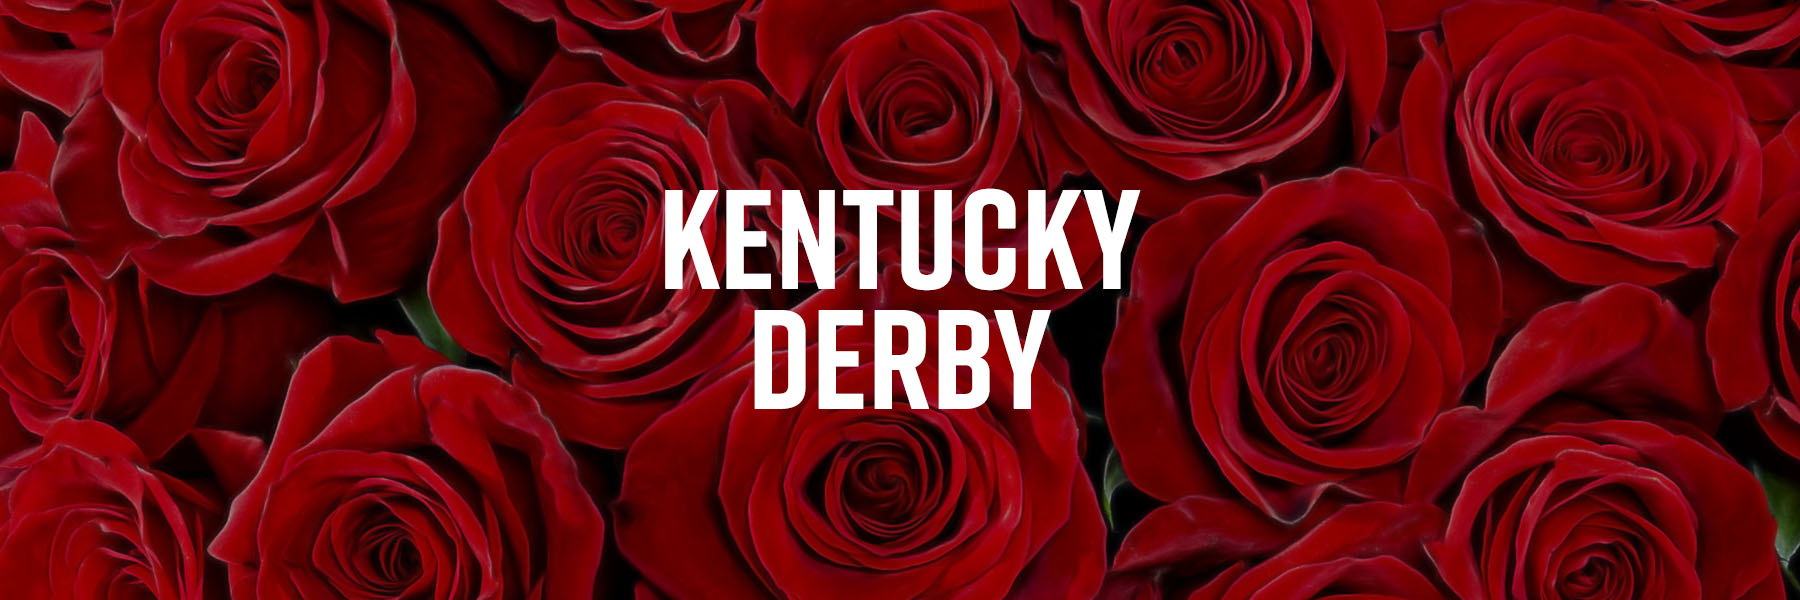 Jeff Siegel’s Blog: Kentucky Derby Workout Analysis and Triple Crown Elite-8 Power Rankings (Updated April 28, 2021)